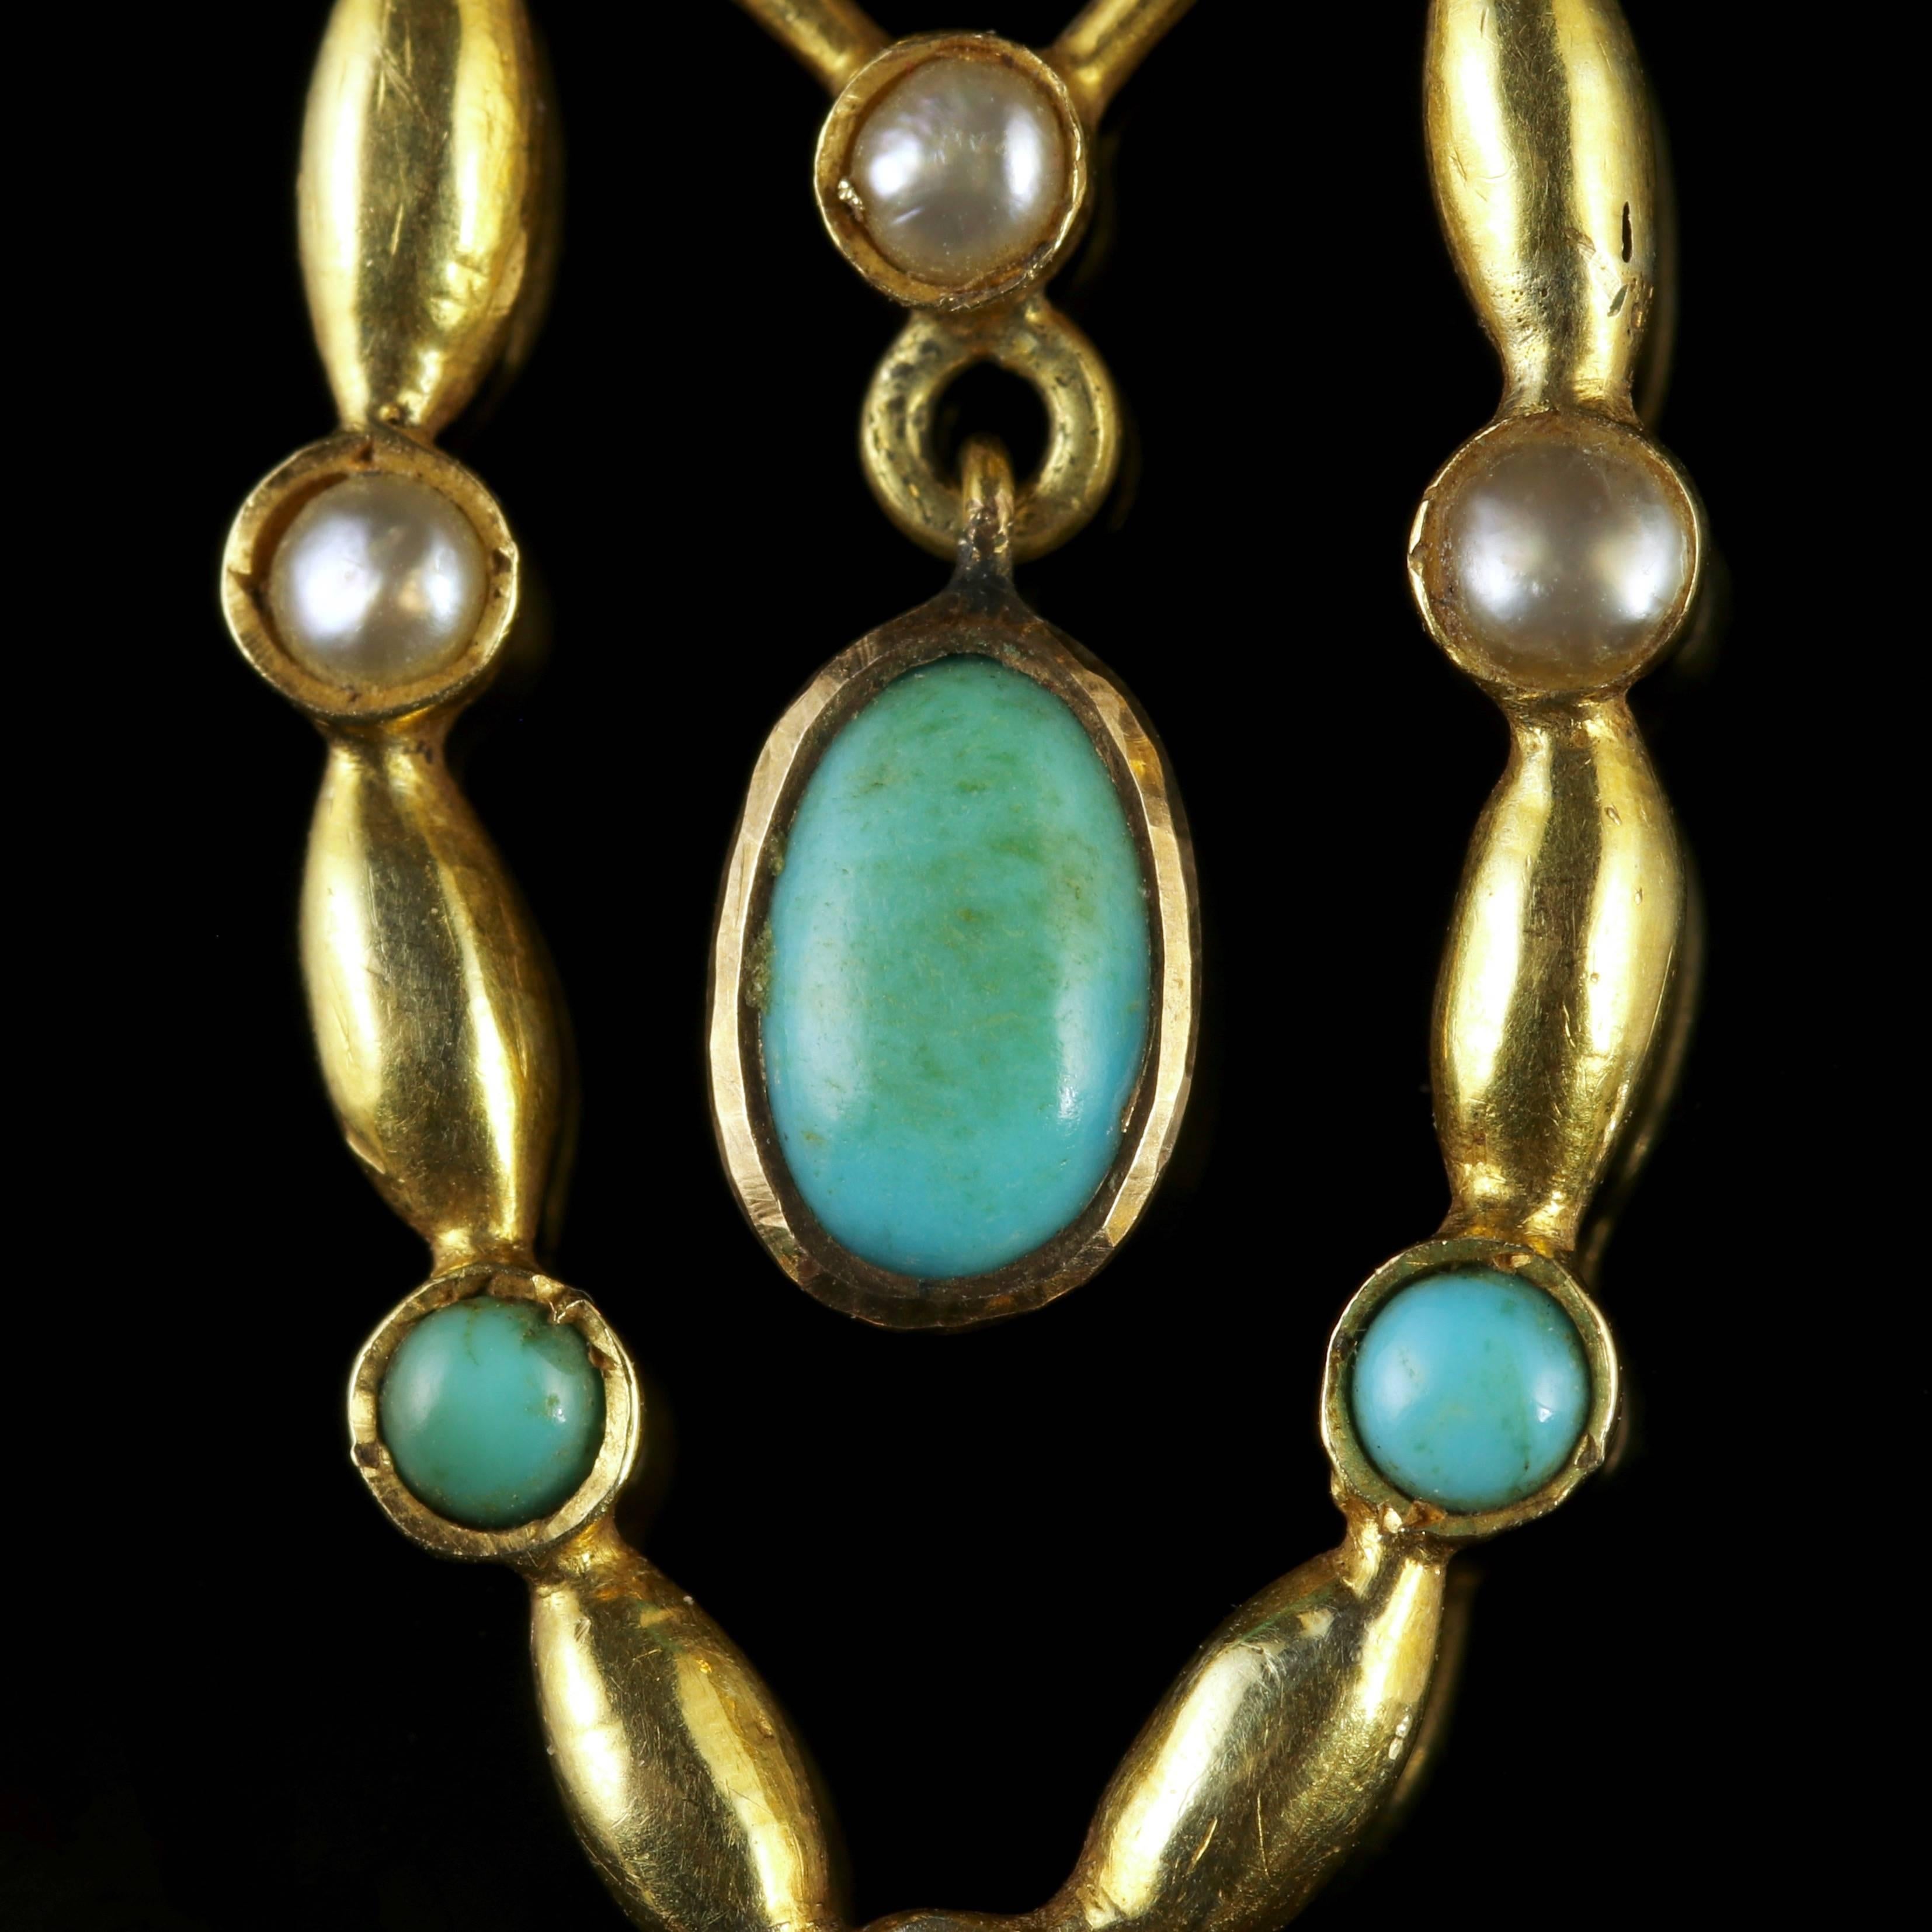 This beautiful antique Victorian 15ct Yellow Gold pendant is adorned with Turquoises and Pearls. 

A genuine Victorian piece, Circa 1880. 

The pendant has two fabulous droppers each crowned with Turquoise stones.

The Turquoise is said to have